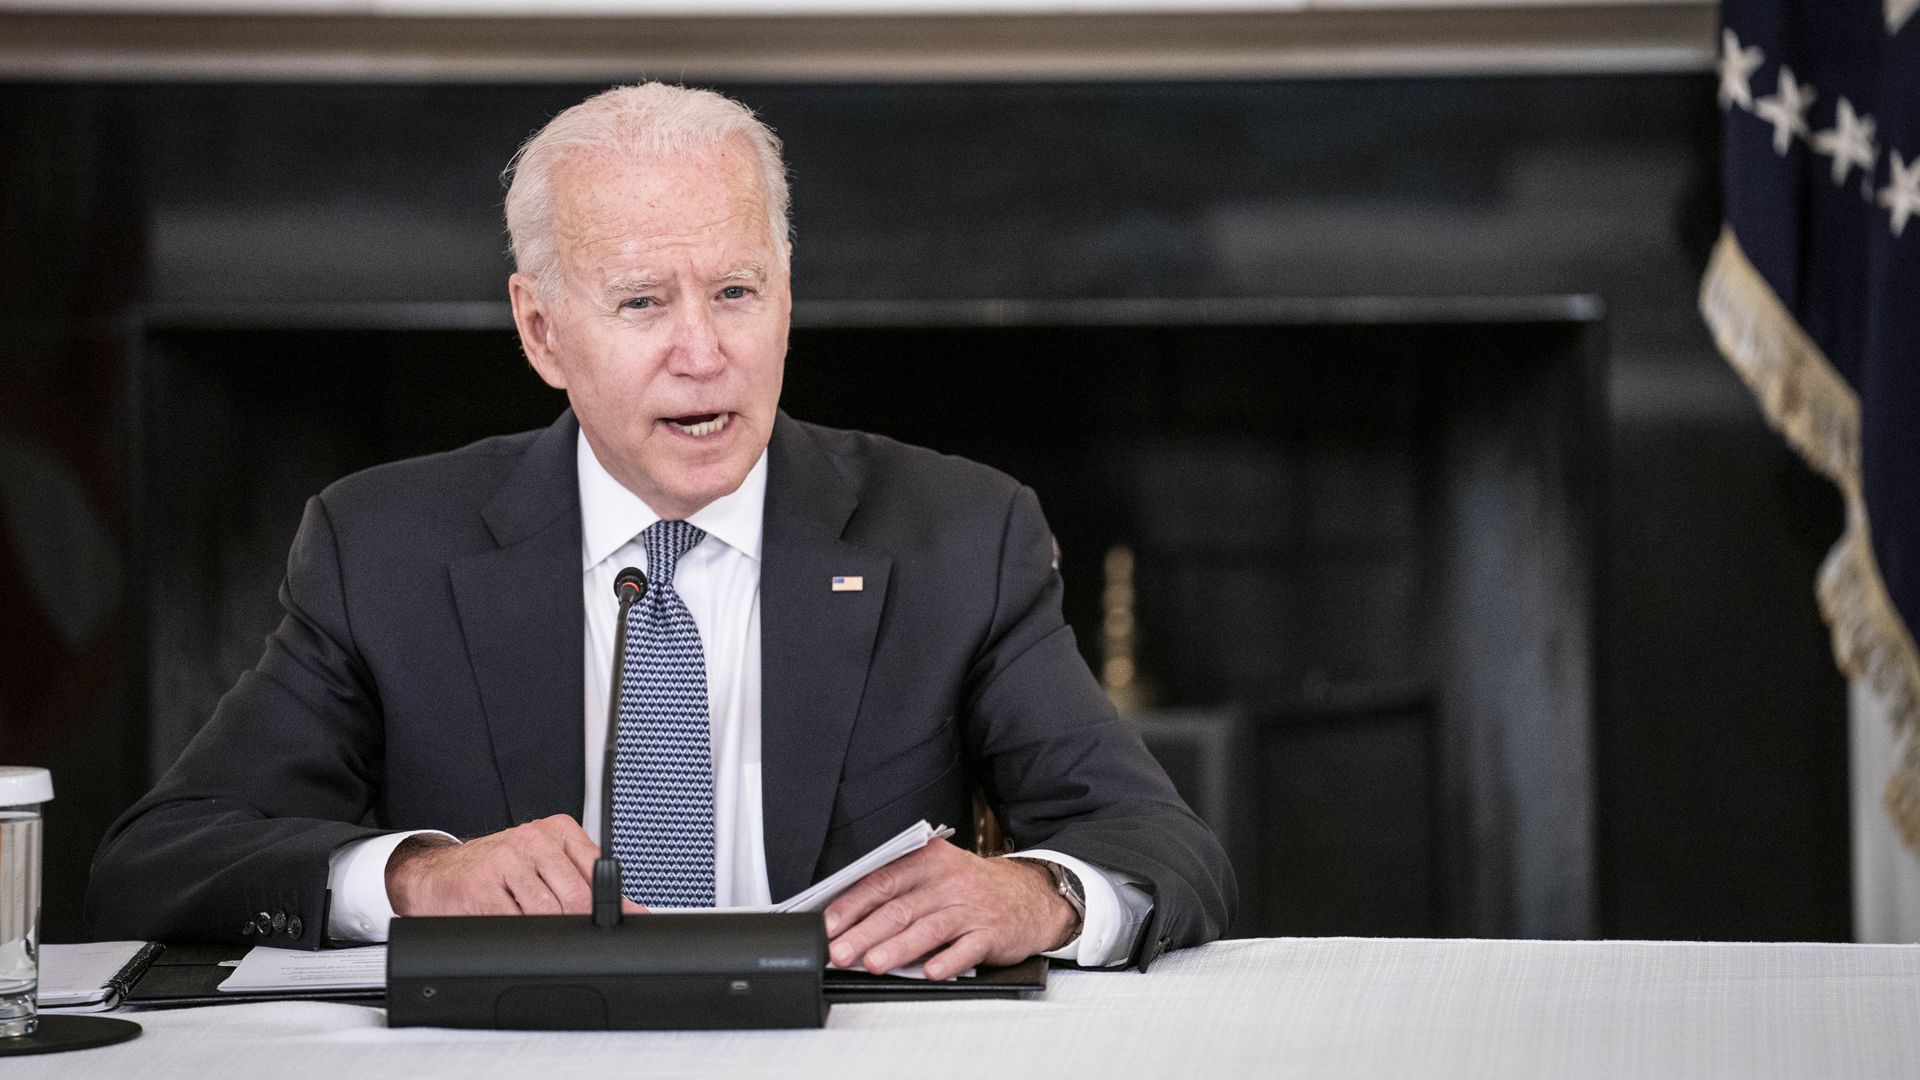 Photo of Joe Biden sitting at a table and speaking 